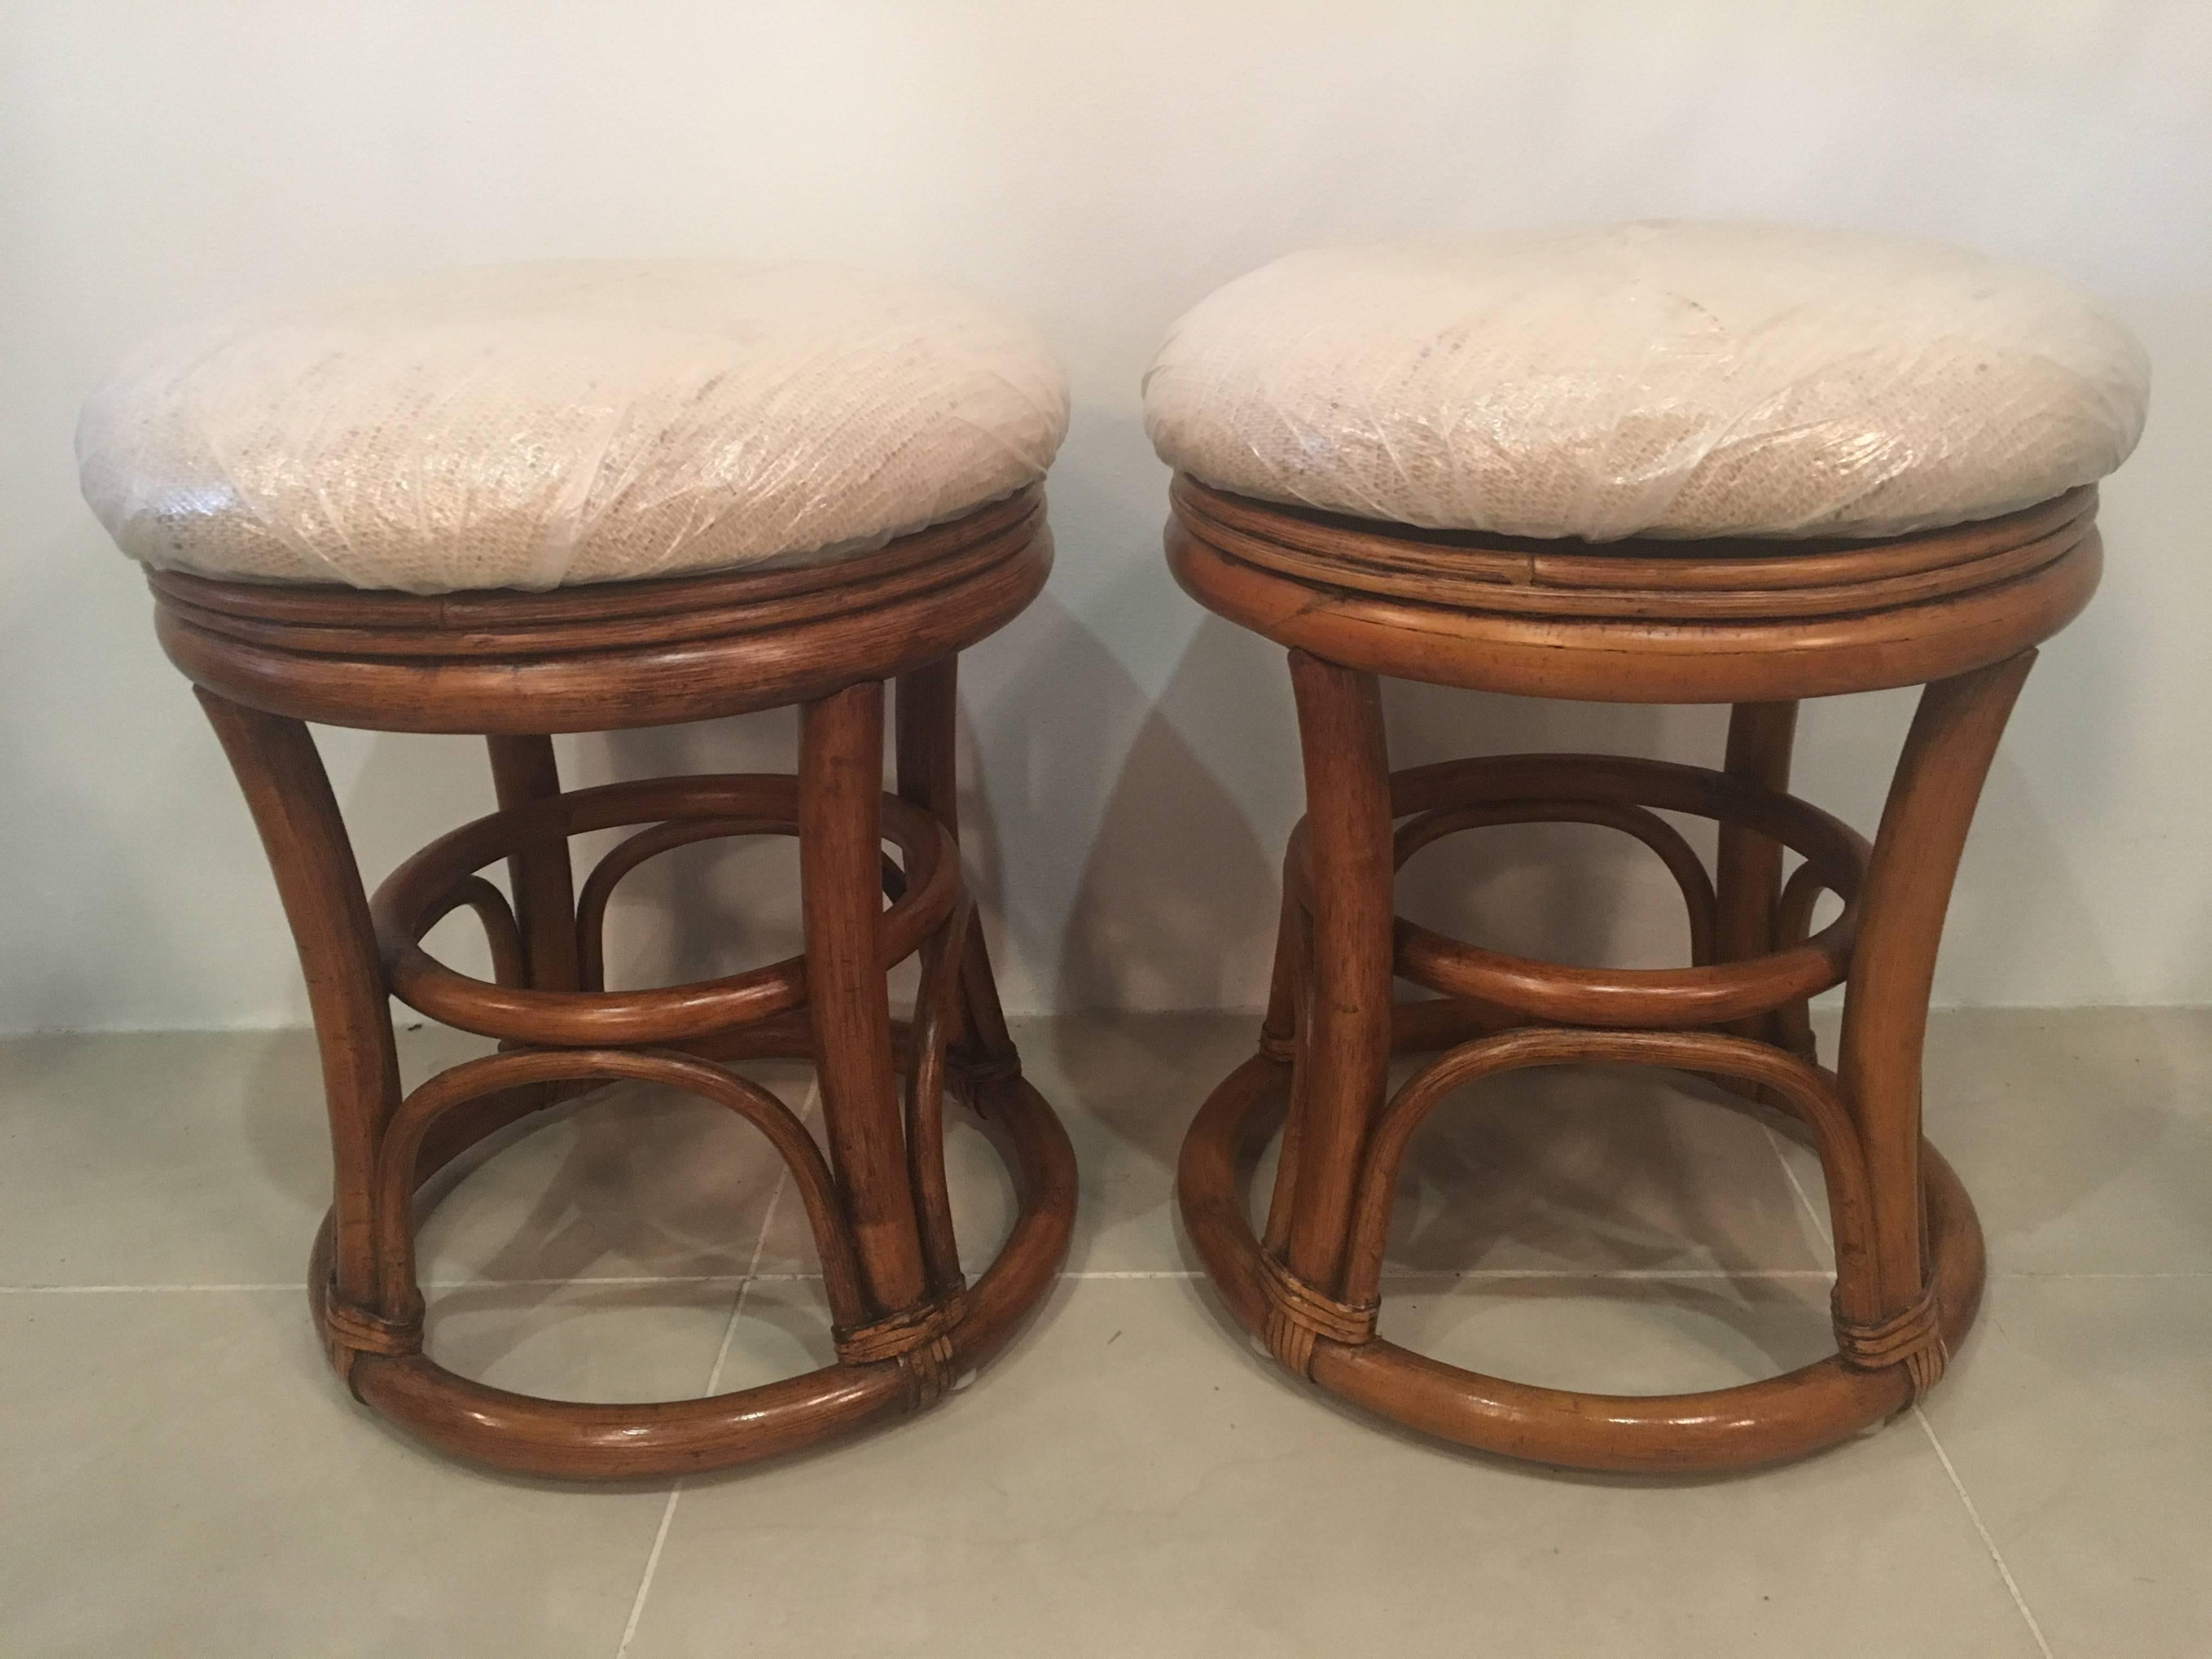 Late 20th Century Pair of Vintage Rattan Stools Benches Tropical Palm Beach